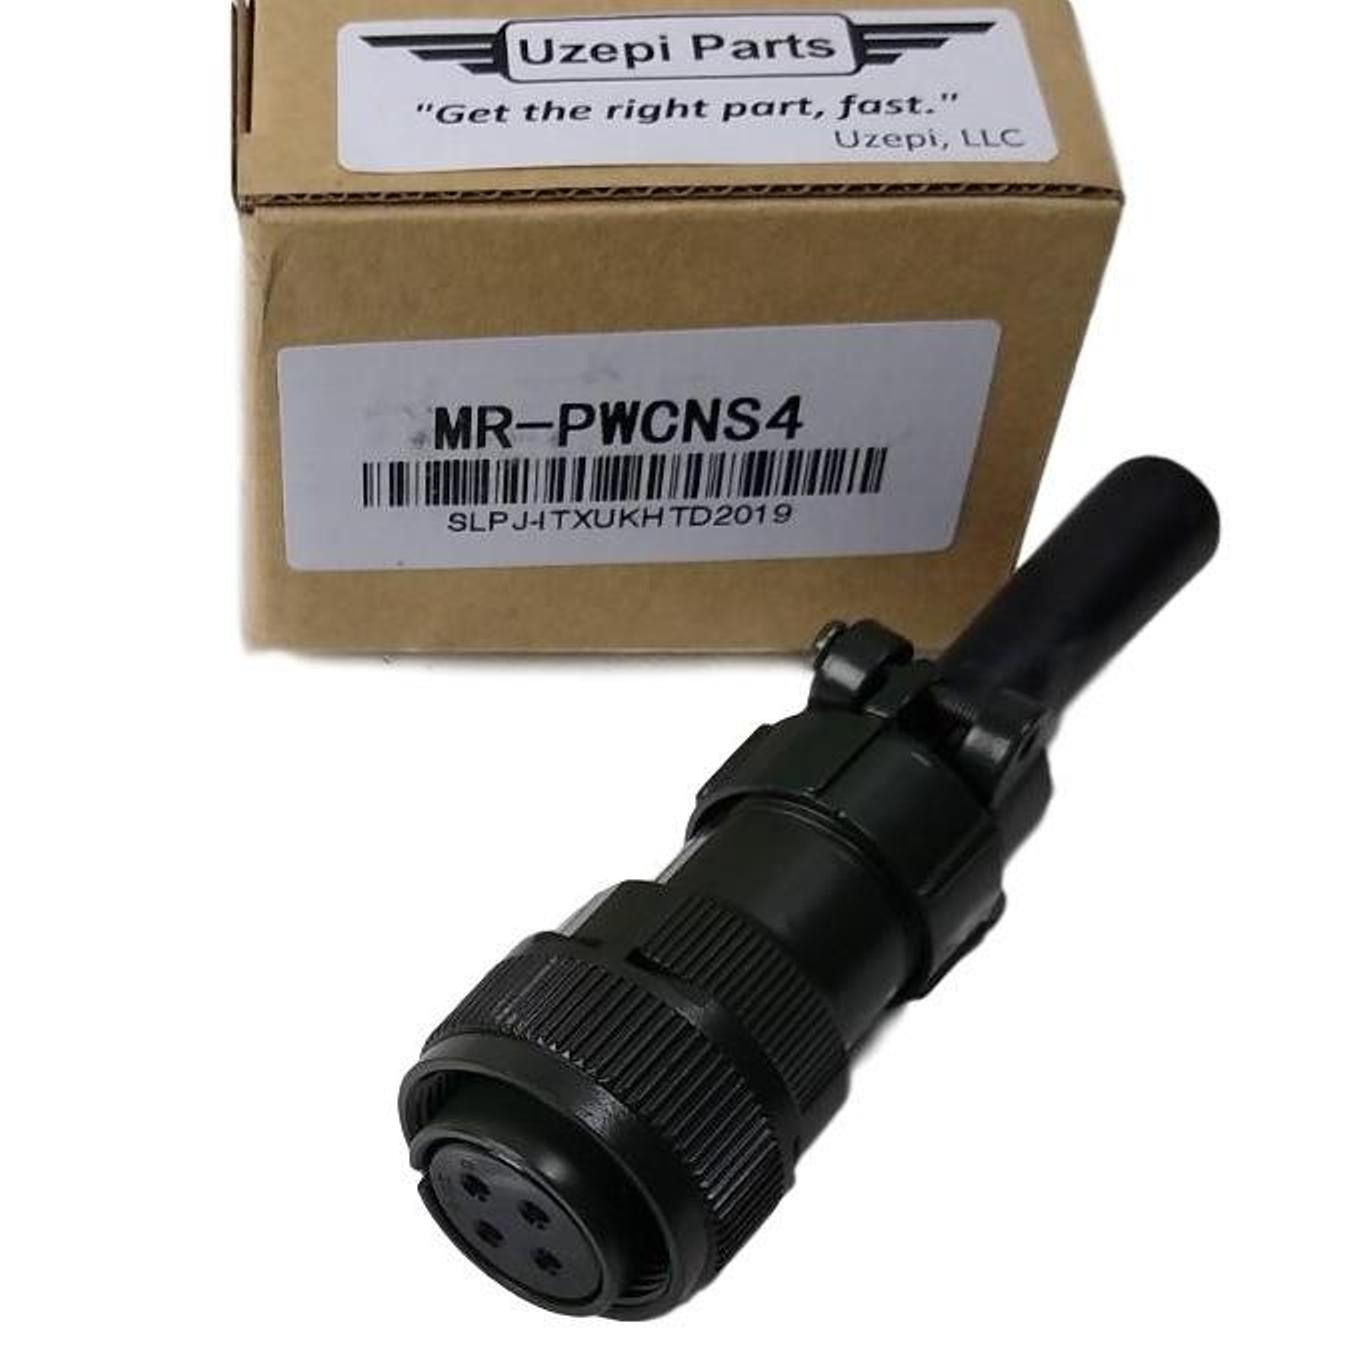 MR-PWCNS4-SUB Connector, Fast Ship from USA. 1 Business Day Ship-Out